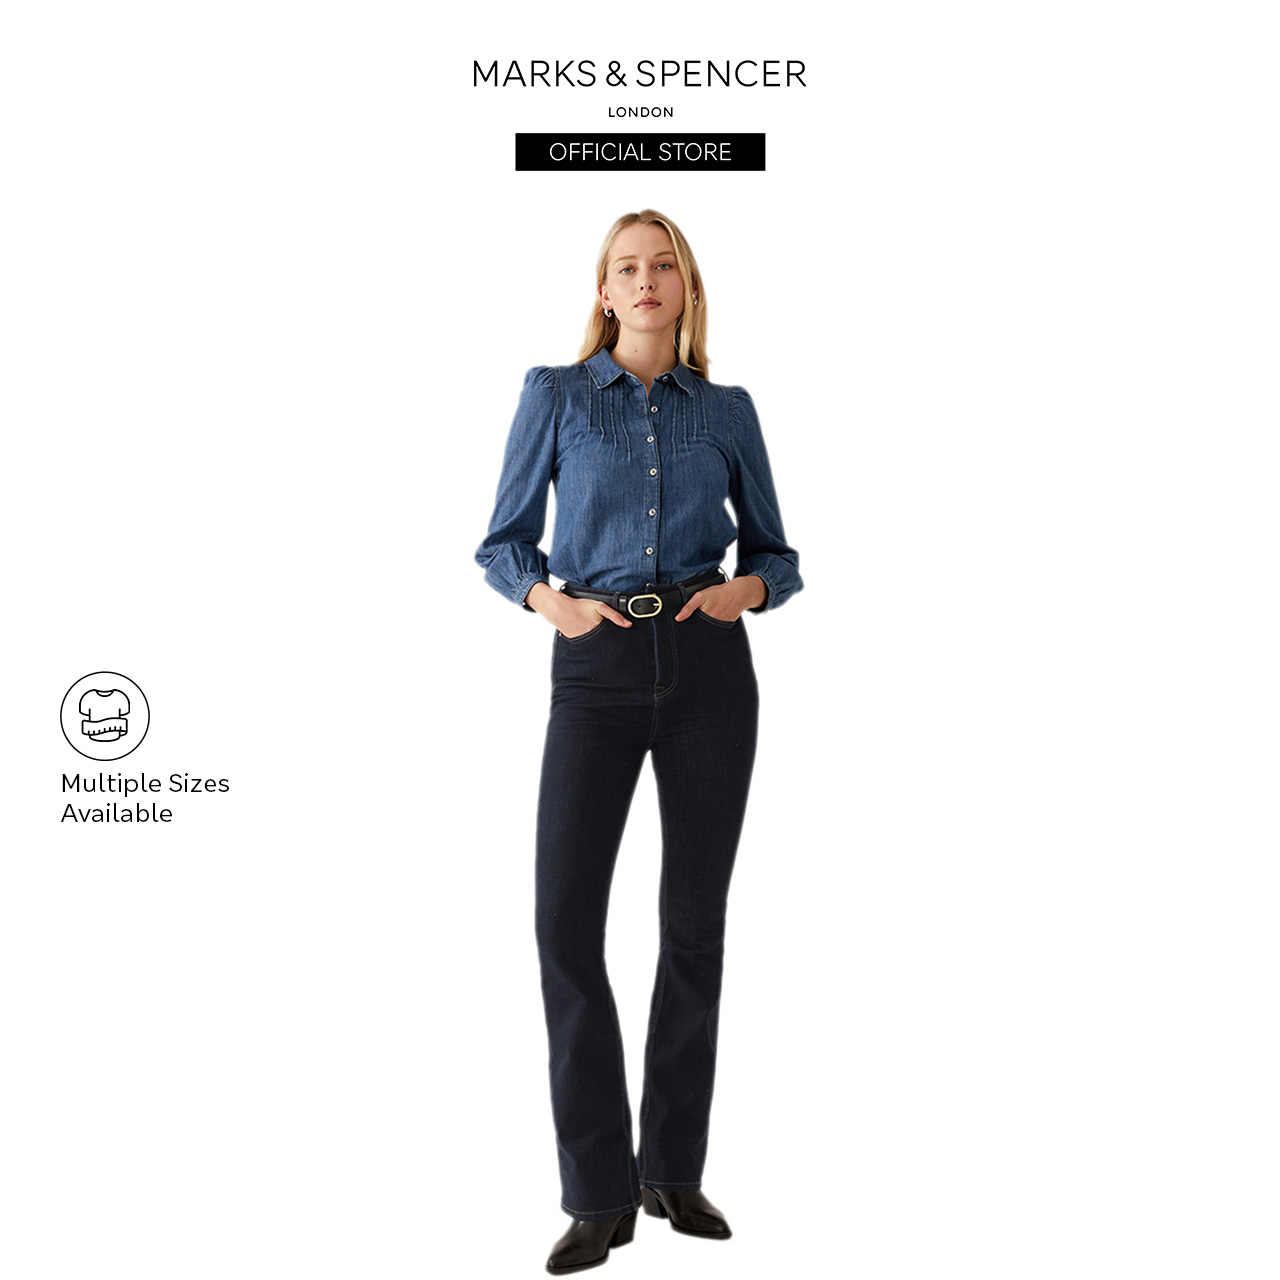 Magic Shaping High Waisted Slim Flare Jeans, M&S Collection